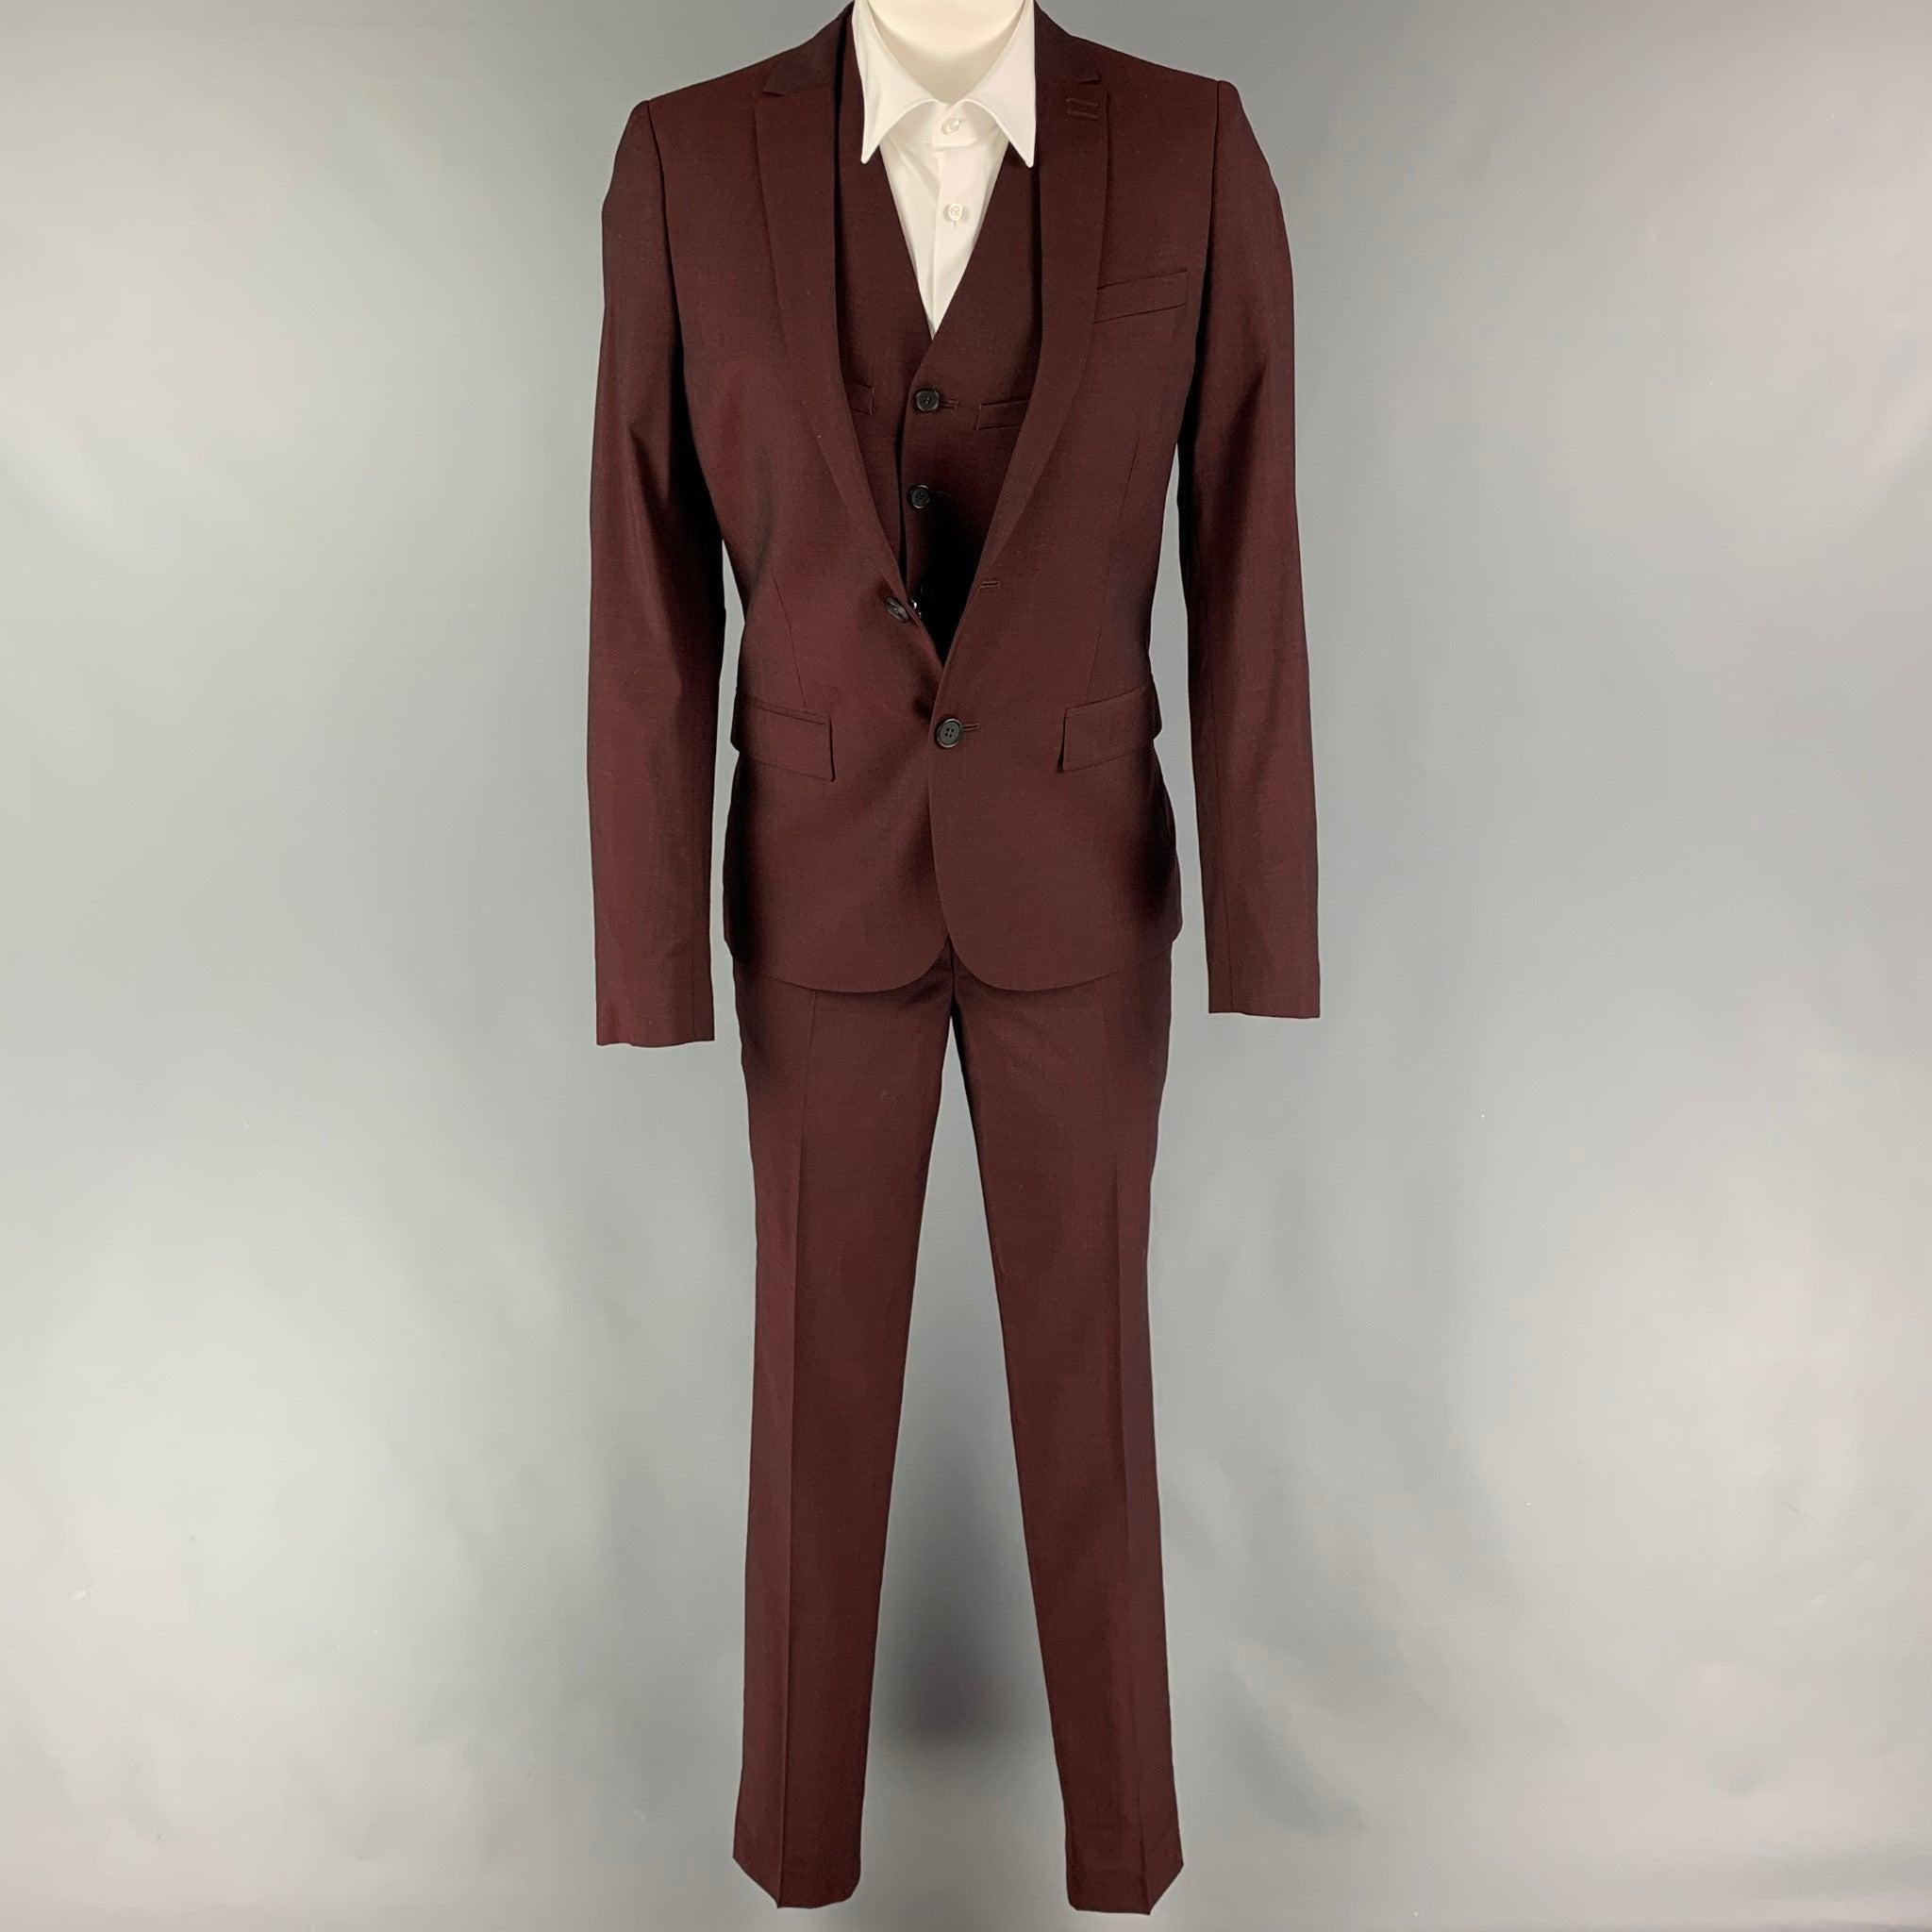 THE KOOPLES 3 Piece
suit comes in a burgundy wool with a full liner and includes a single breasted, double button sport coat with a notch lapel and a matching vest & flat front trousers. New With Tags.  

Marked:   44 

Measurements: 
 